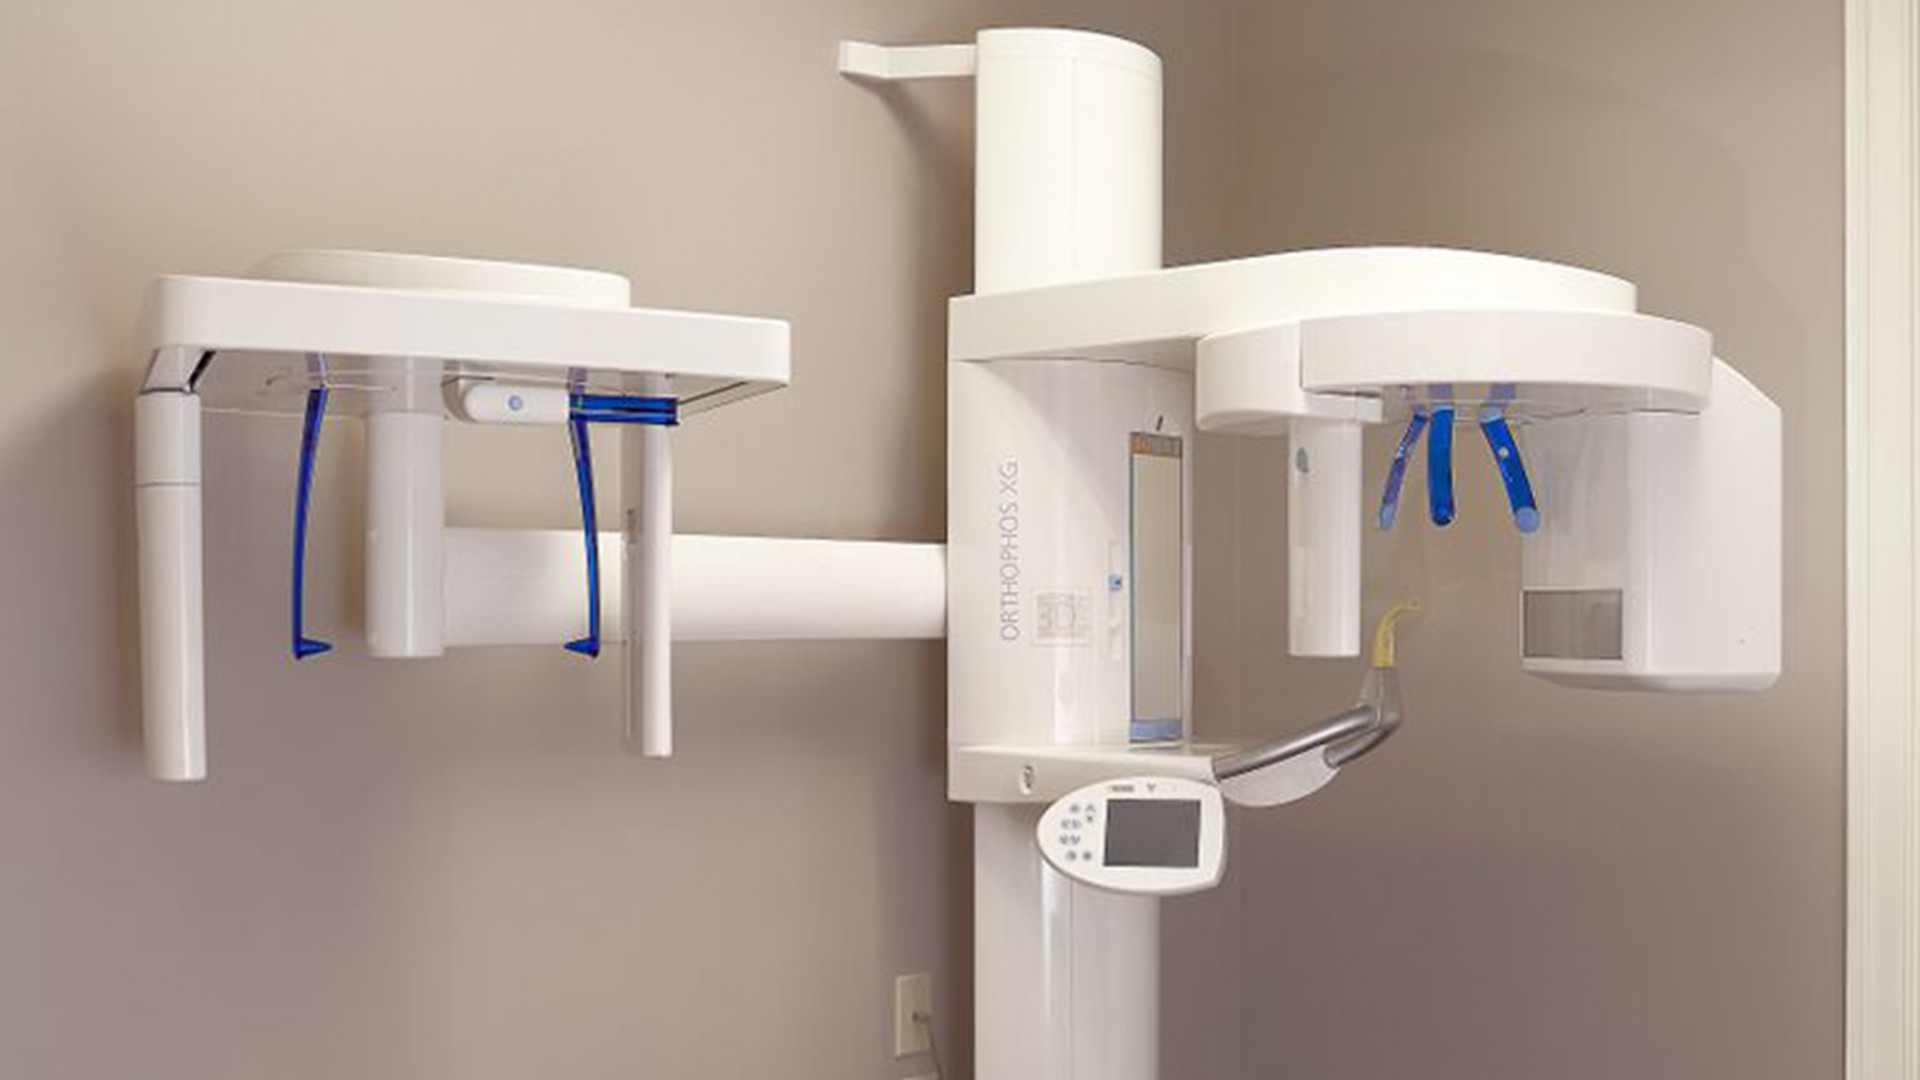 Picture of the x-ray machine